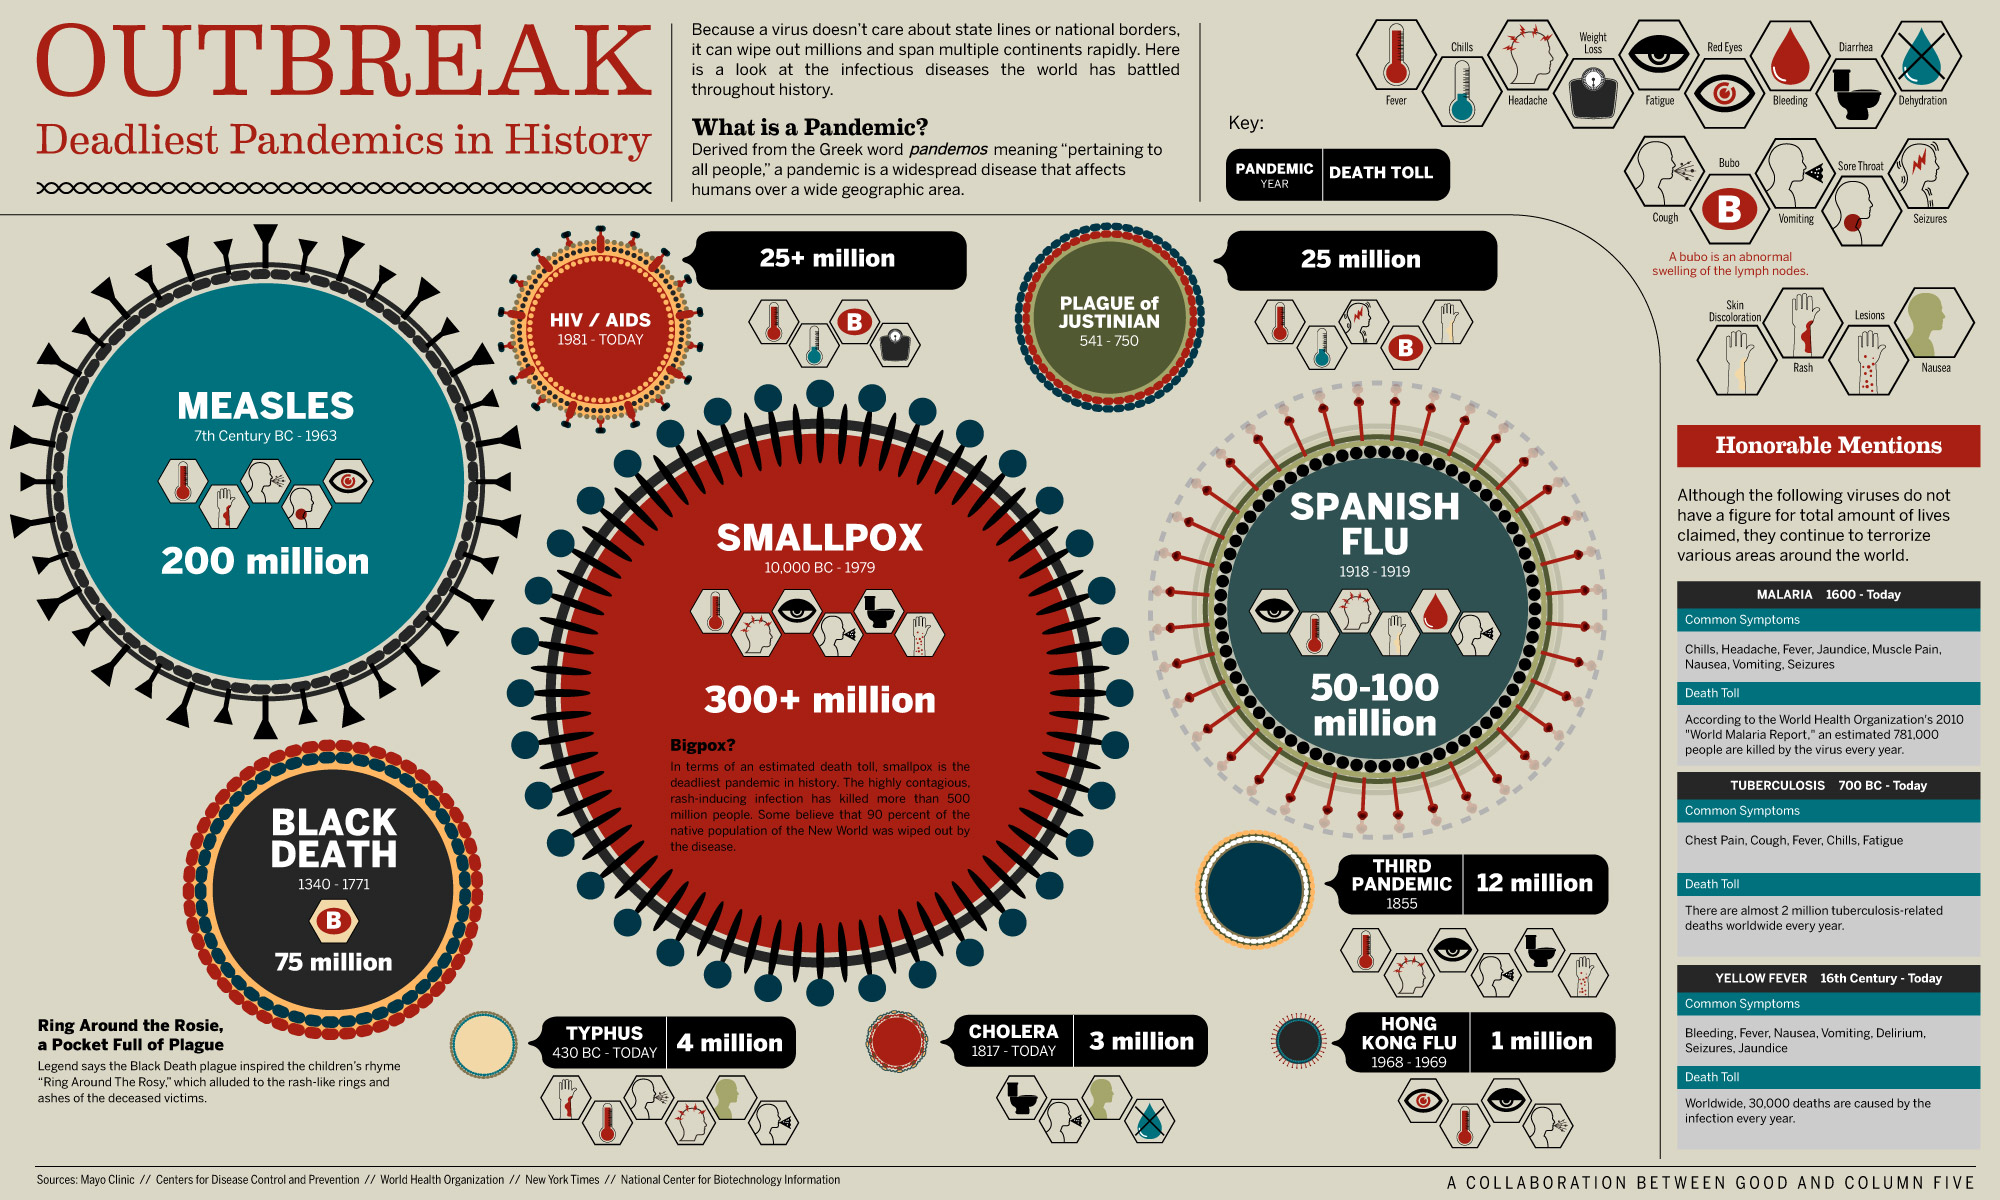 InfoGraphic on the deadliest pandemics in history,